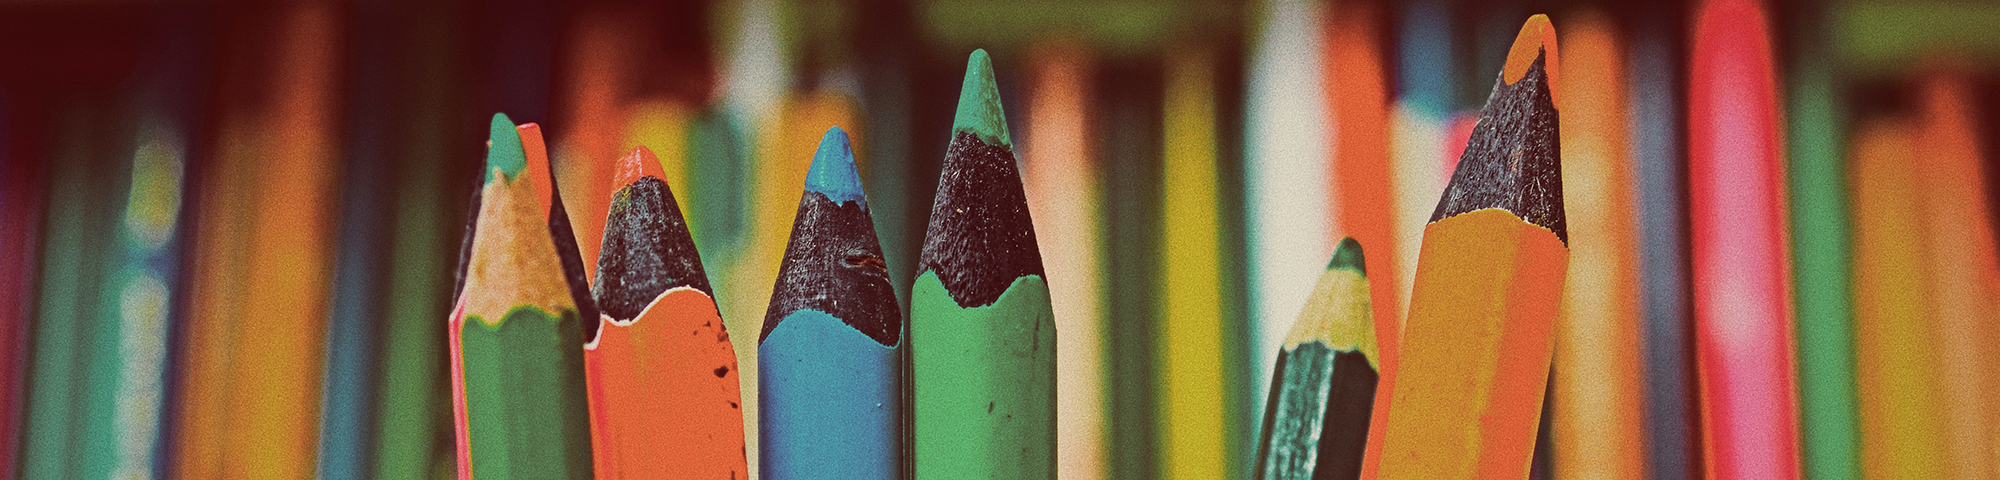 Decorative banner image of colored pencils.